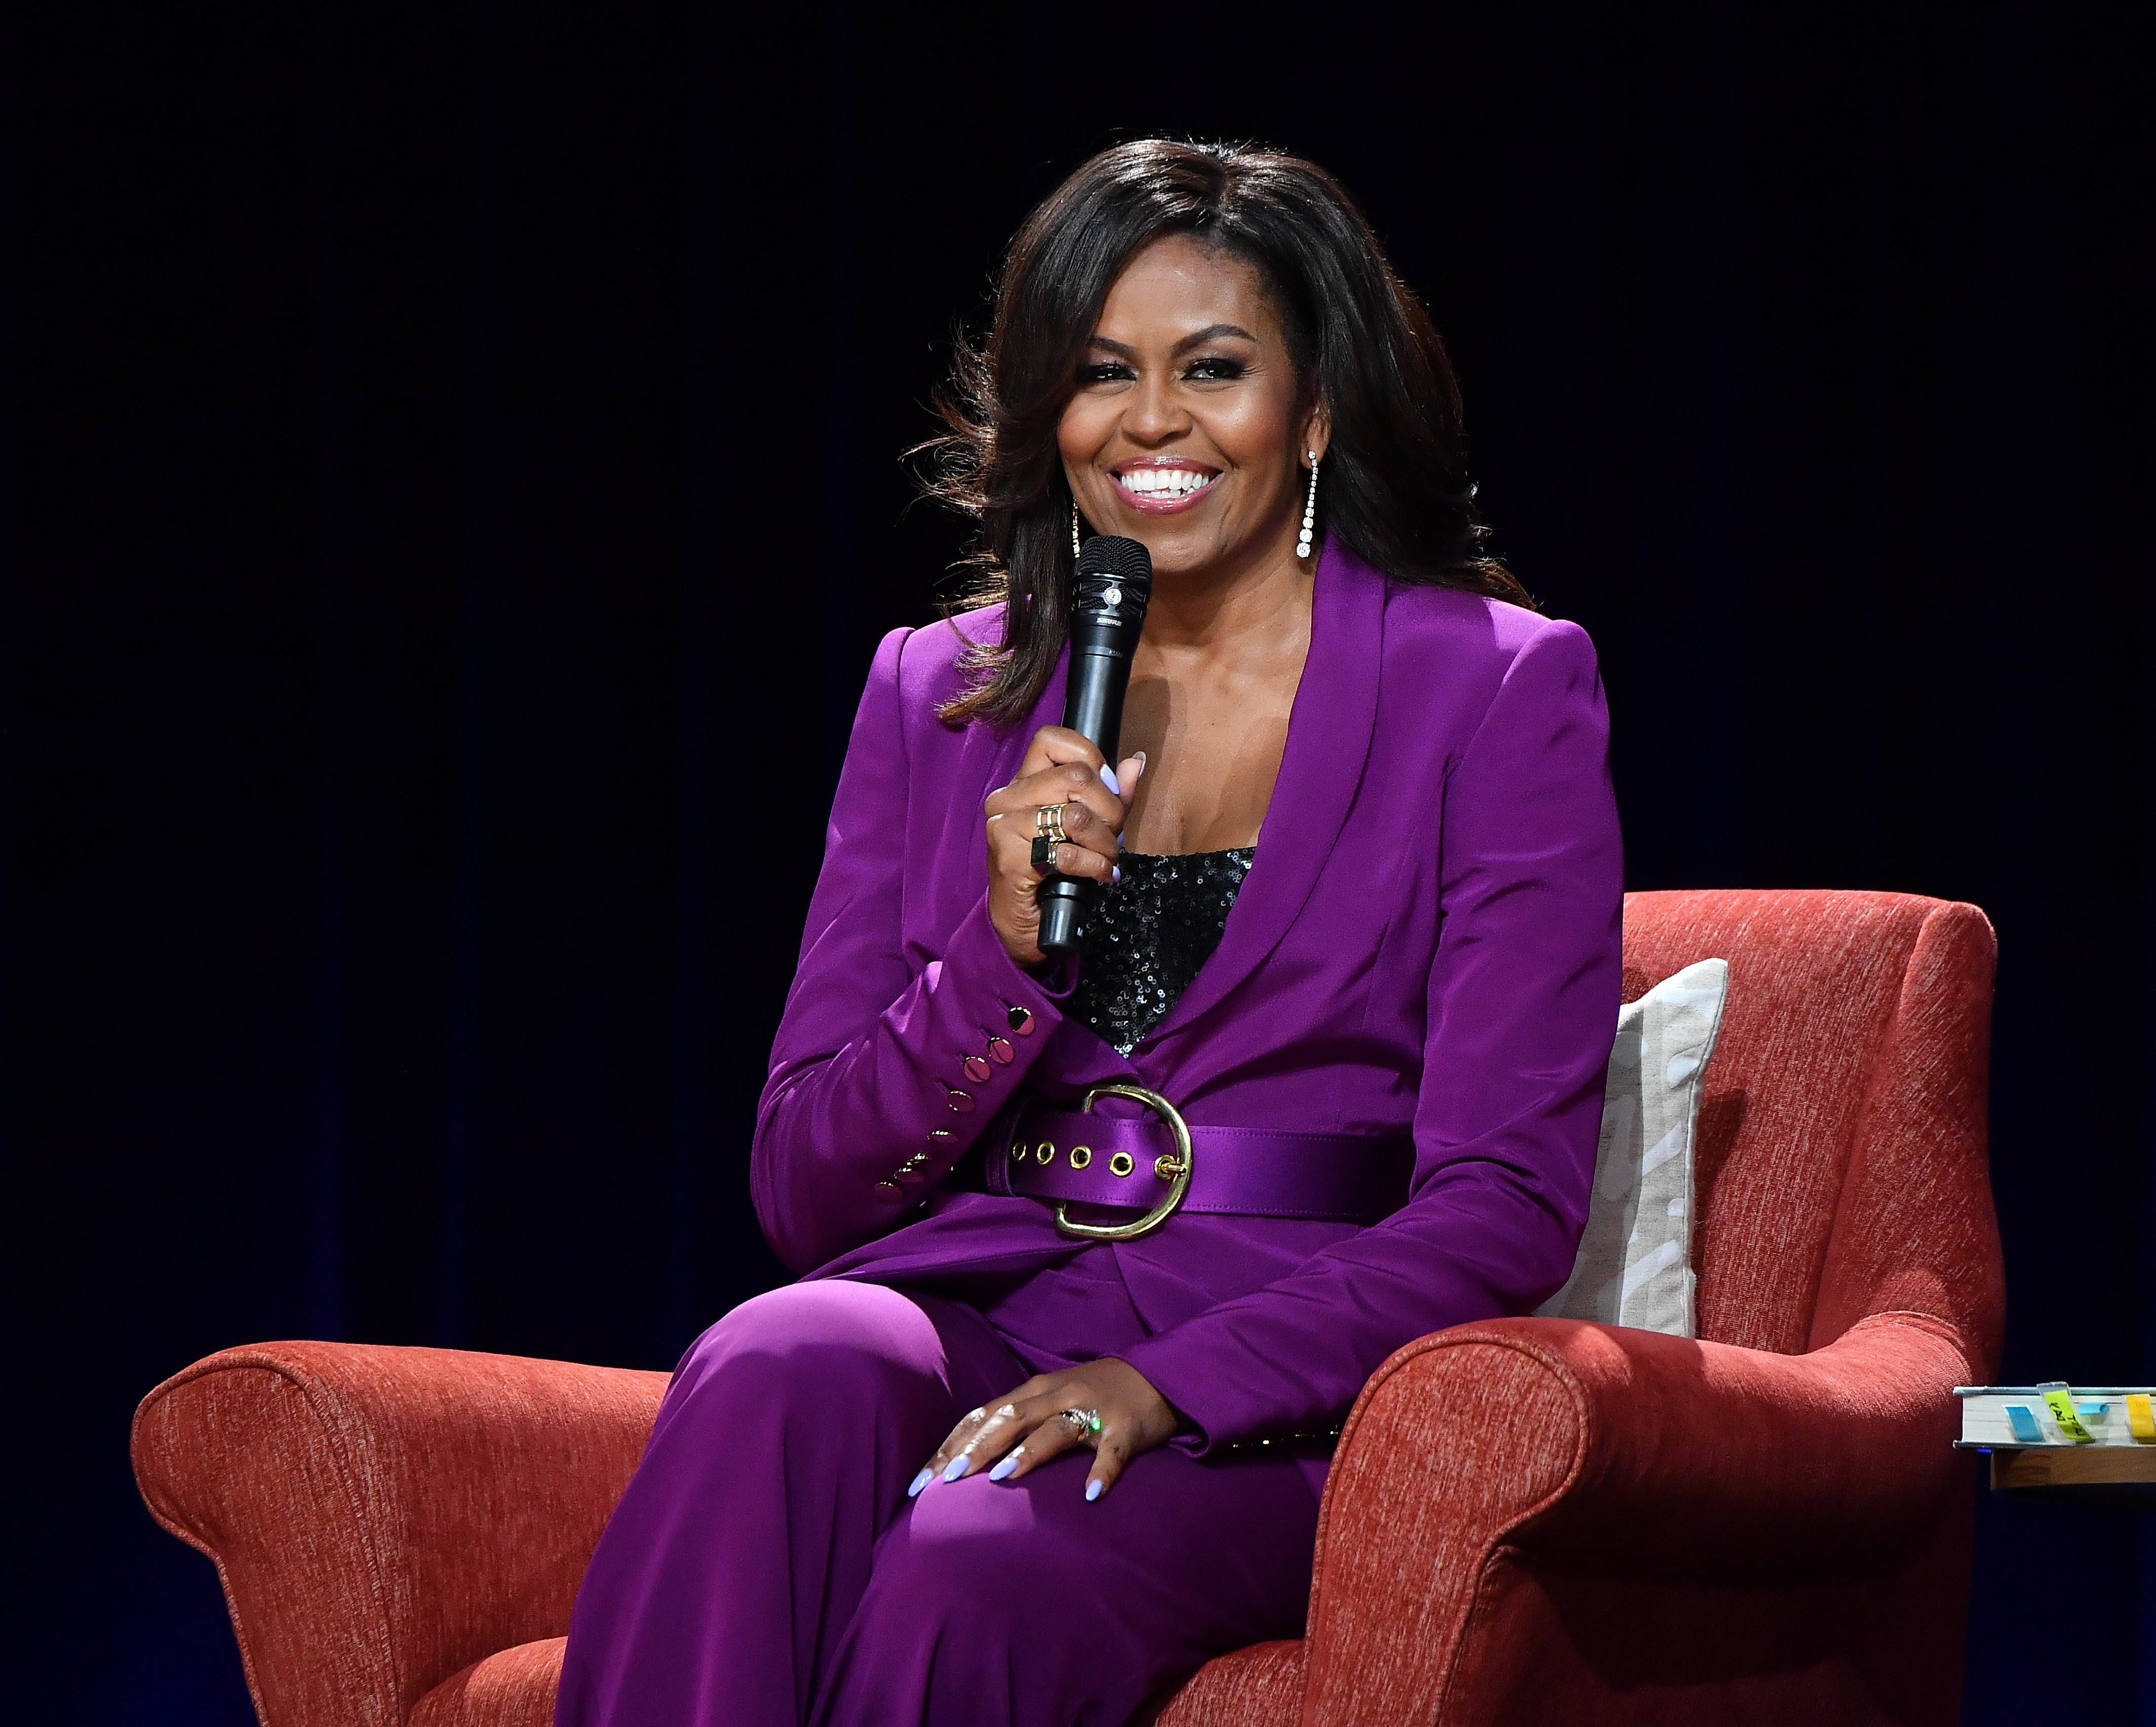 Michelle Obama attends "Becoming: An Intimate Conversation with Michelle Obama" at State Farm Arena on May 11, 2019 in Atlanta, Georgia. | Source: GettyImages